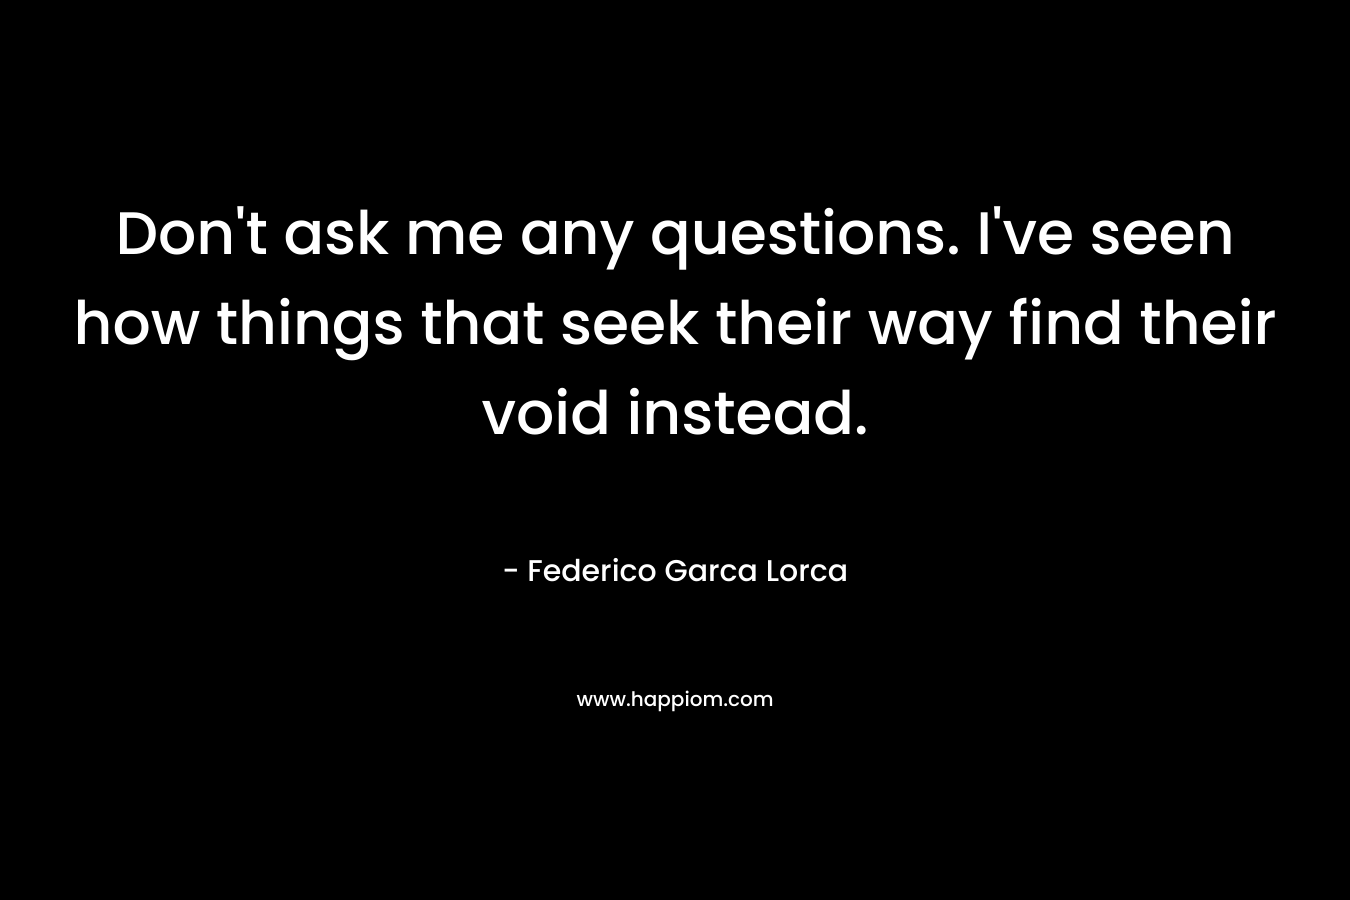 Don’t ask me any questions. I’ve seen how things that seek their way find their void instead. – Federico Garca Lorca